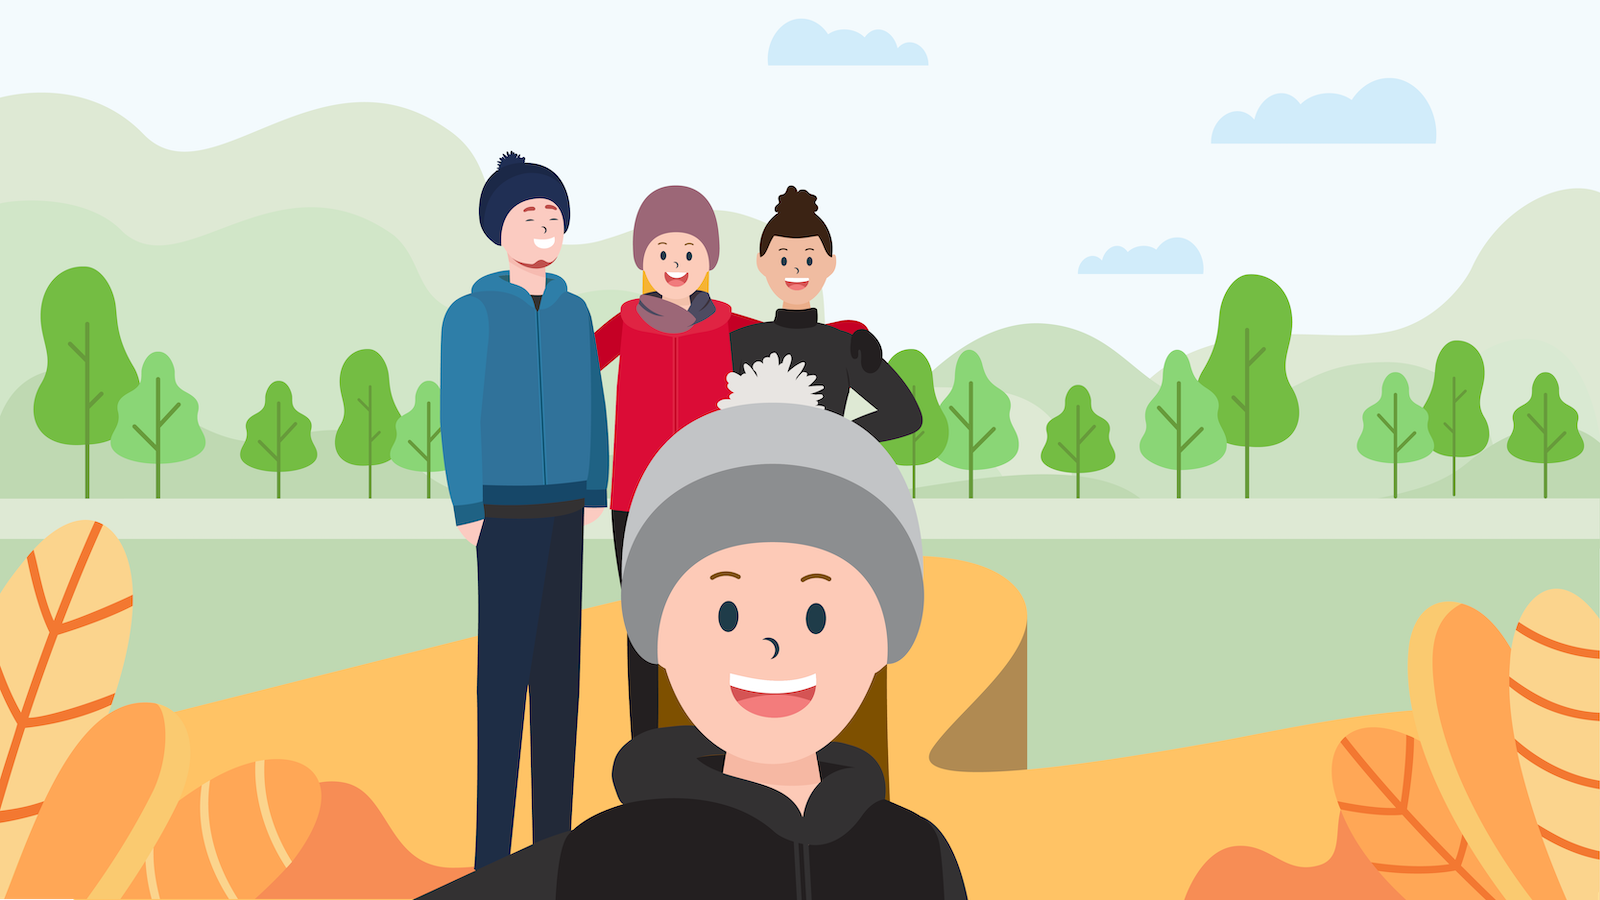 illustration of 4 co-workers on top of a trail outdoors taking a group selfie.  Wearing winter coats and a fall theme nature. 